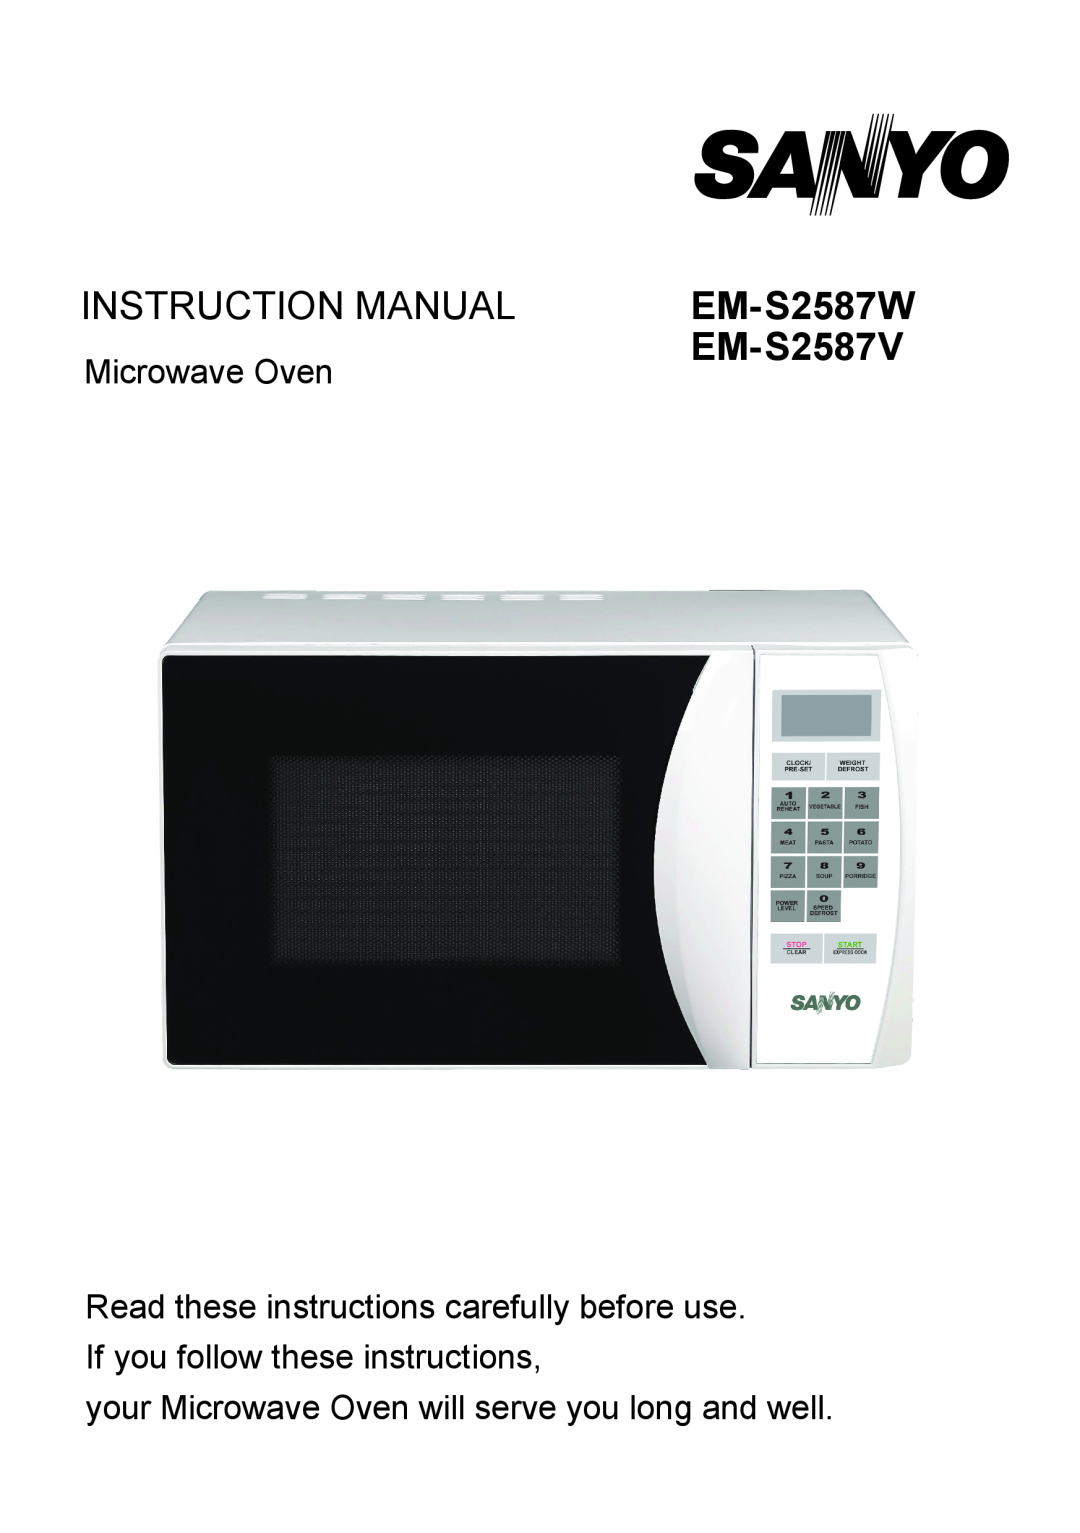 Sanyo EM-S2587V instruction manual your Microwave Oven will serve you long and well, EM-S2587W 